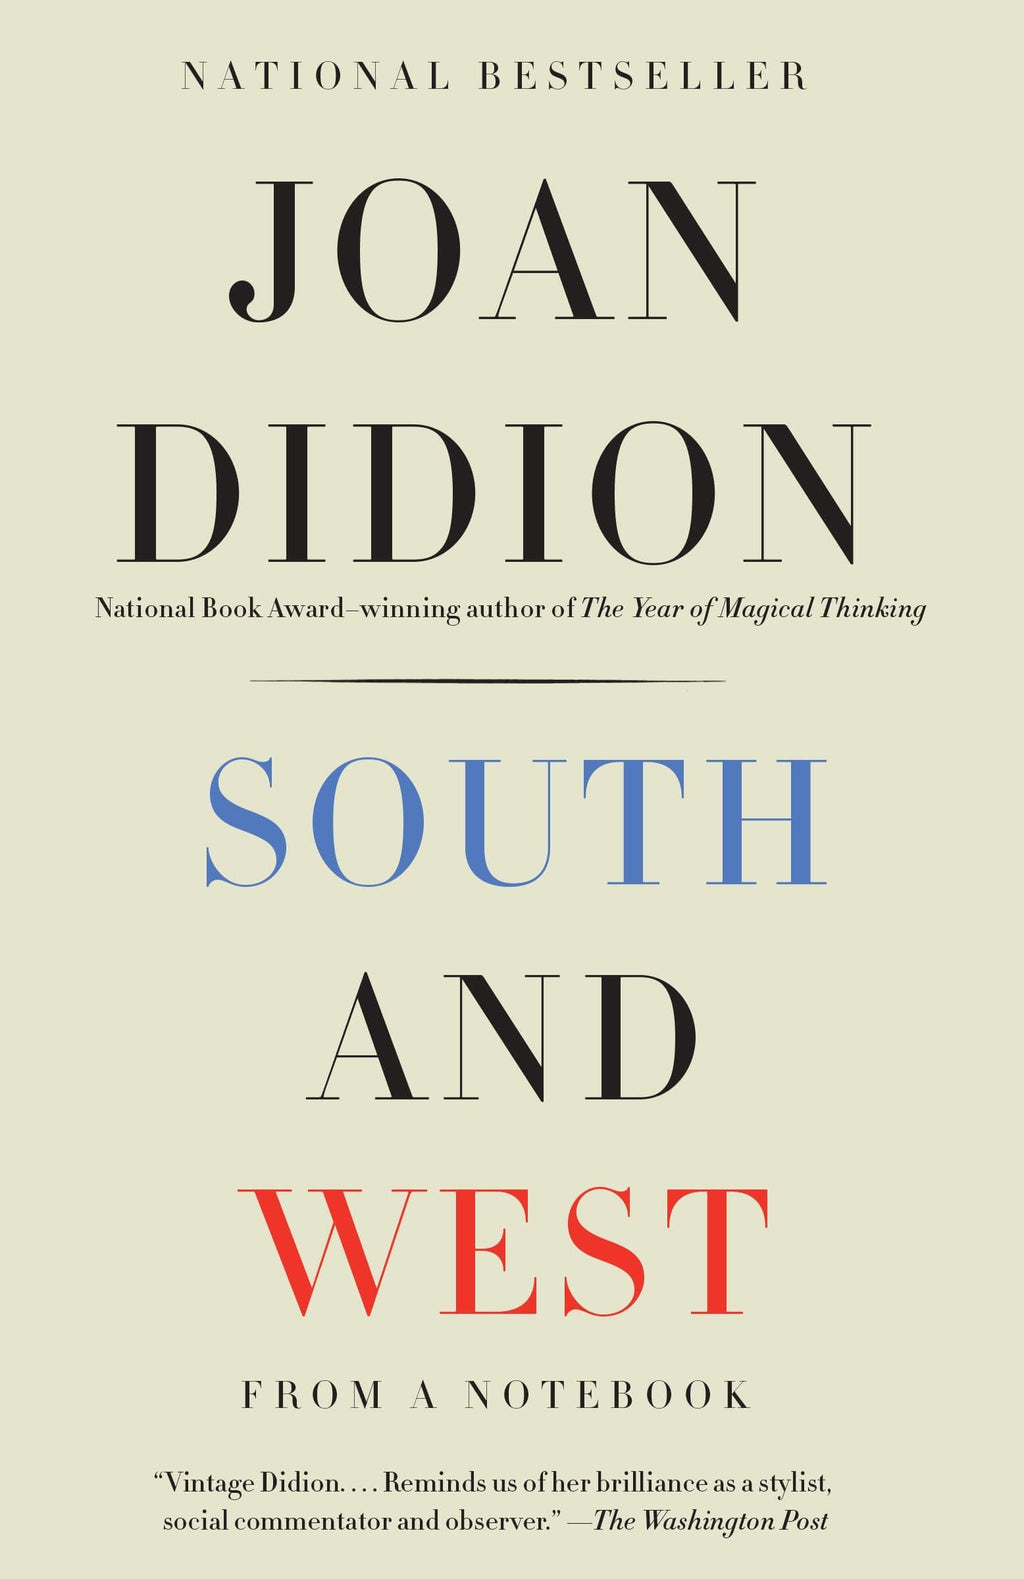 Joan　Notebook　and　Heartworm　South　From　West:　–　Press　Didion　a